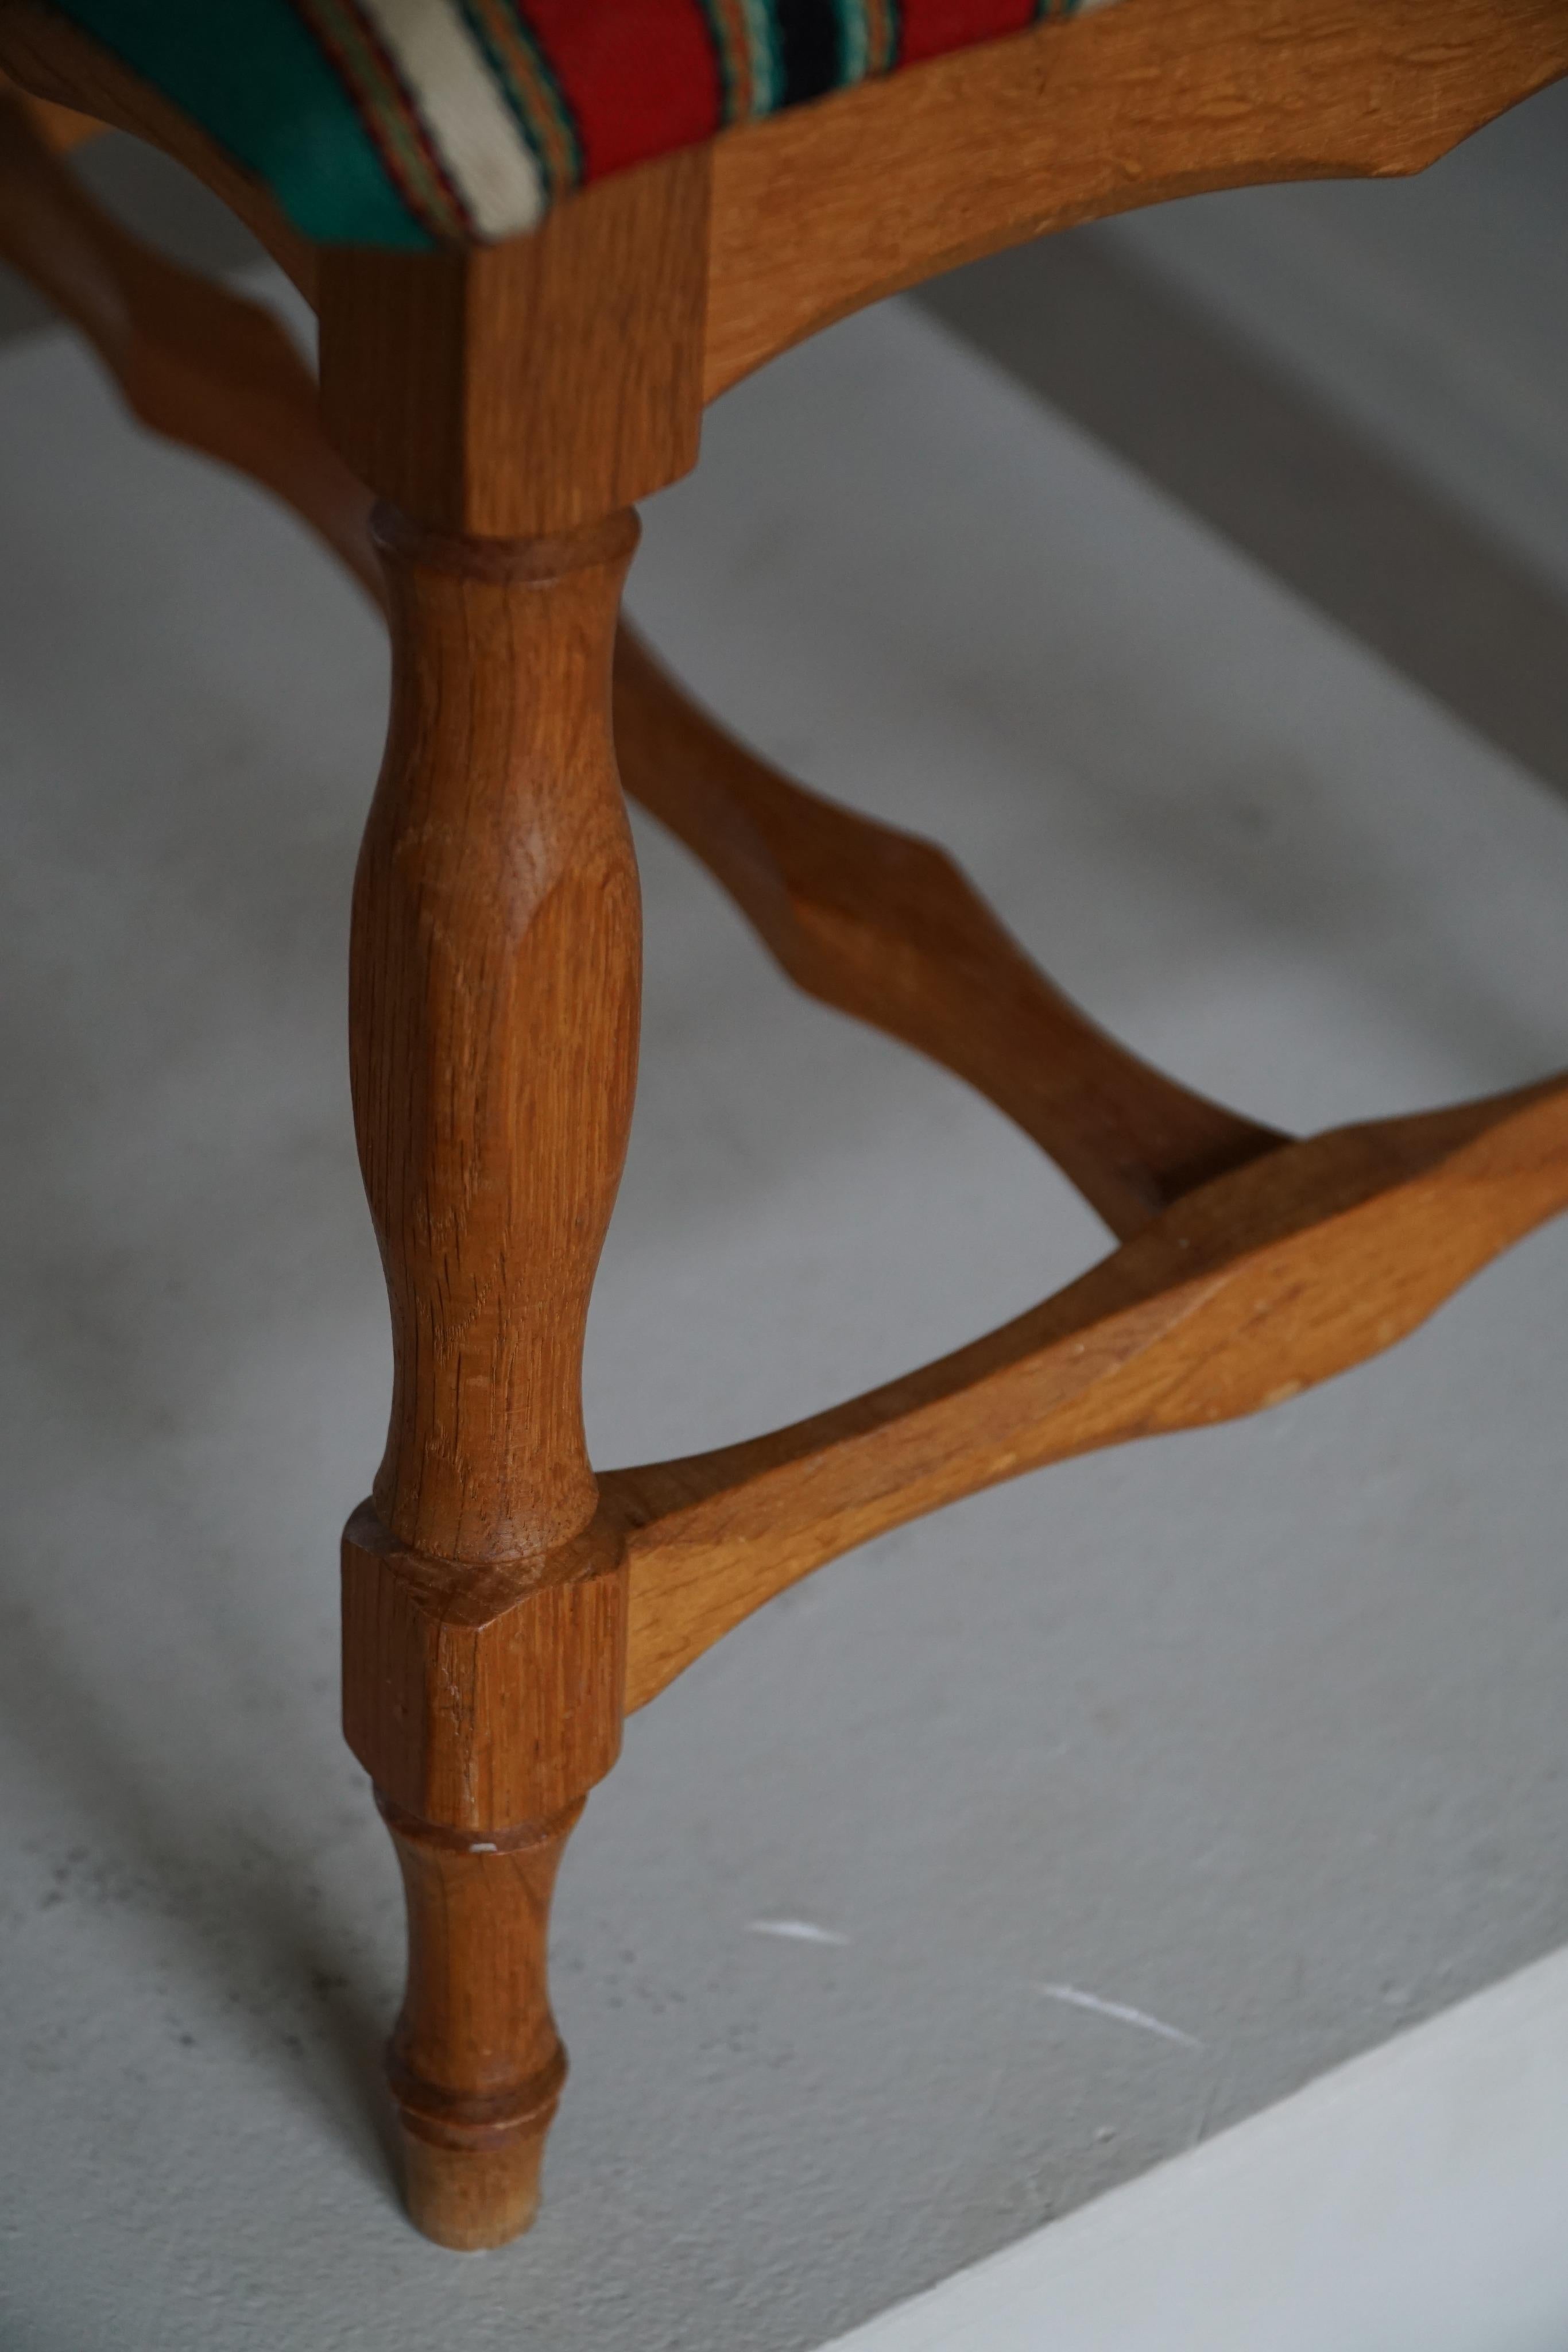 20th Century Stool in Oak and Fabric by a Danish Cabinetmaker, 1950s For Sale